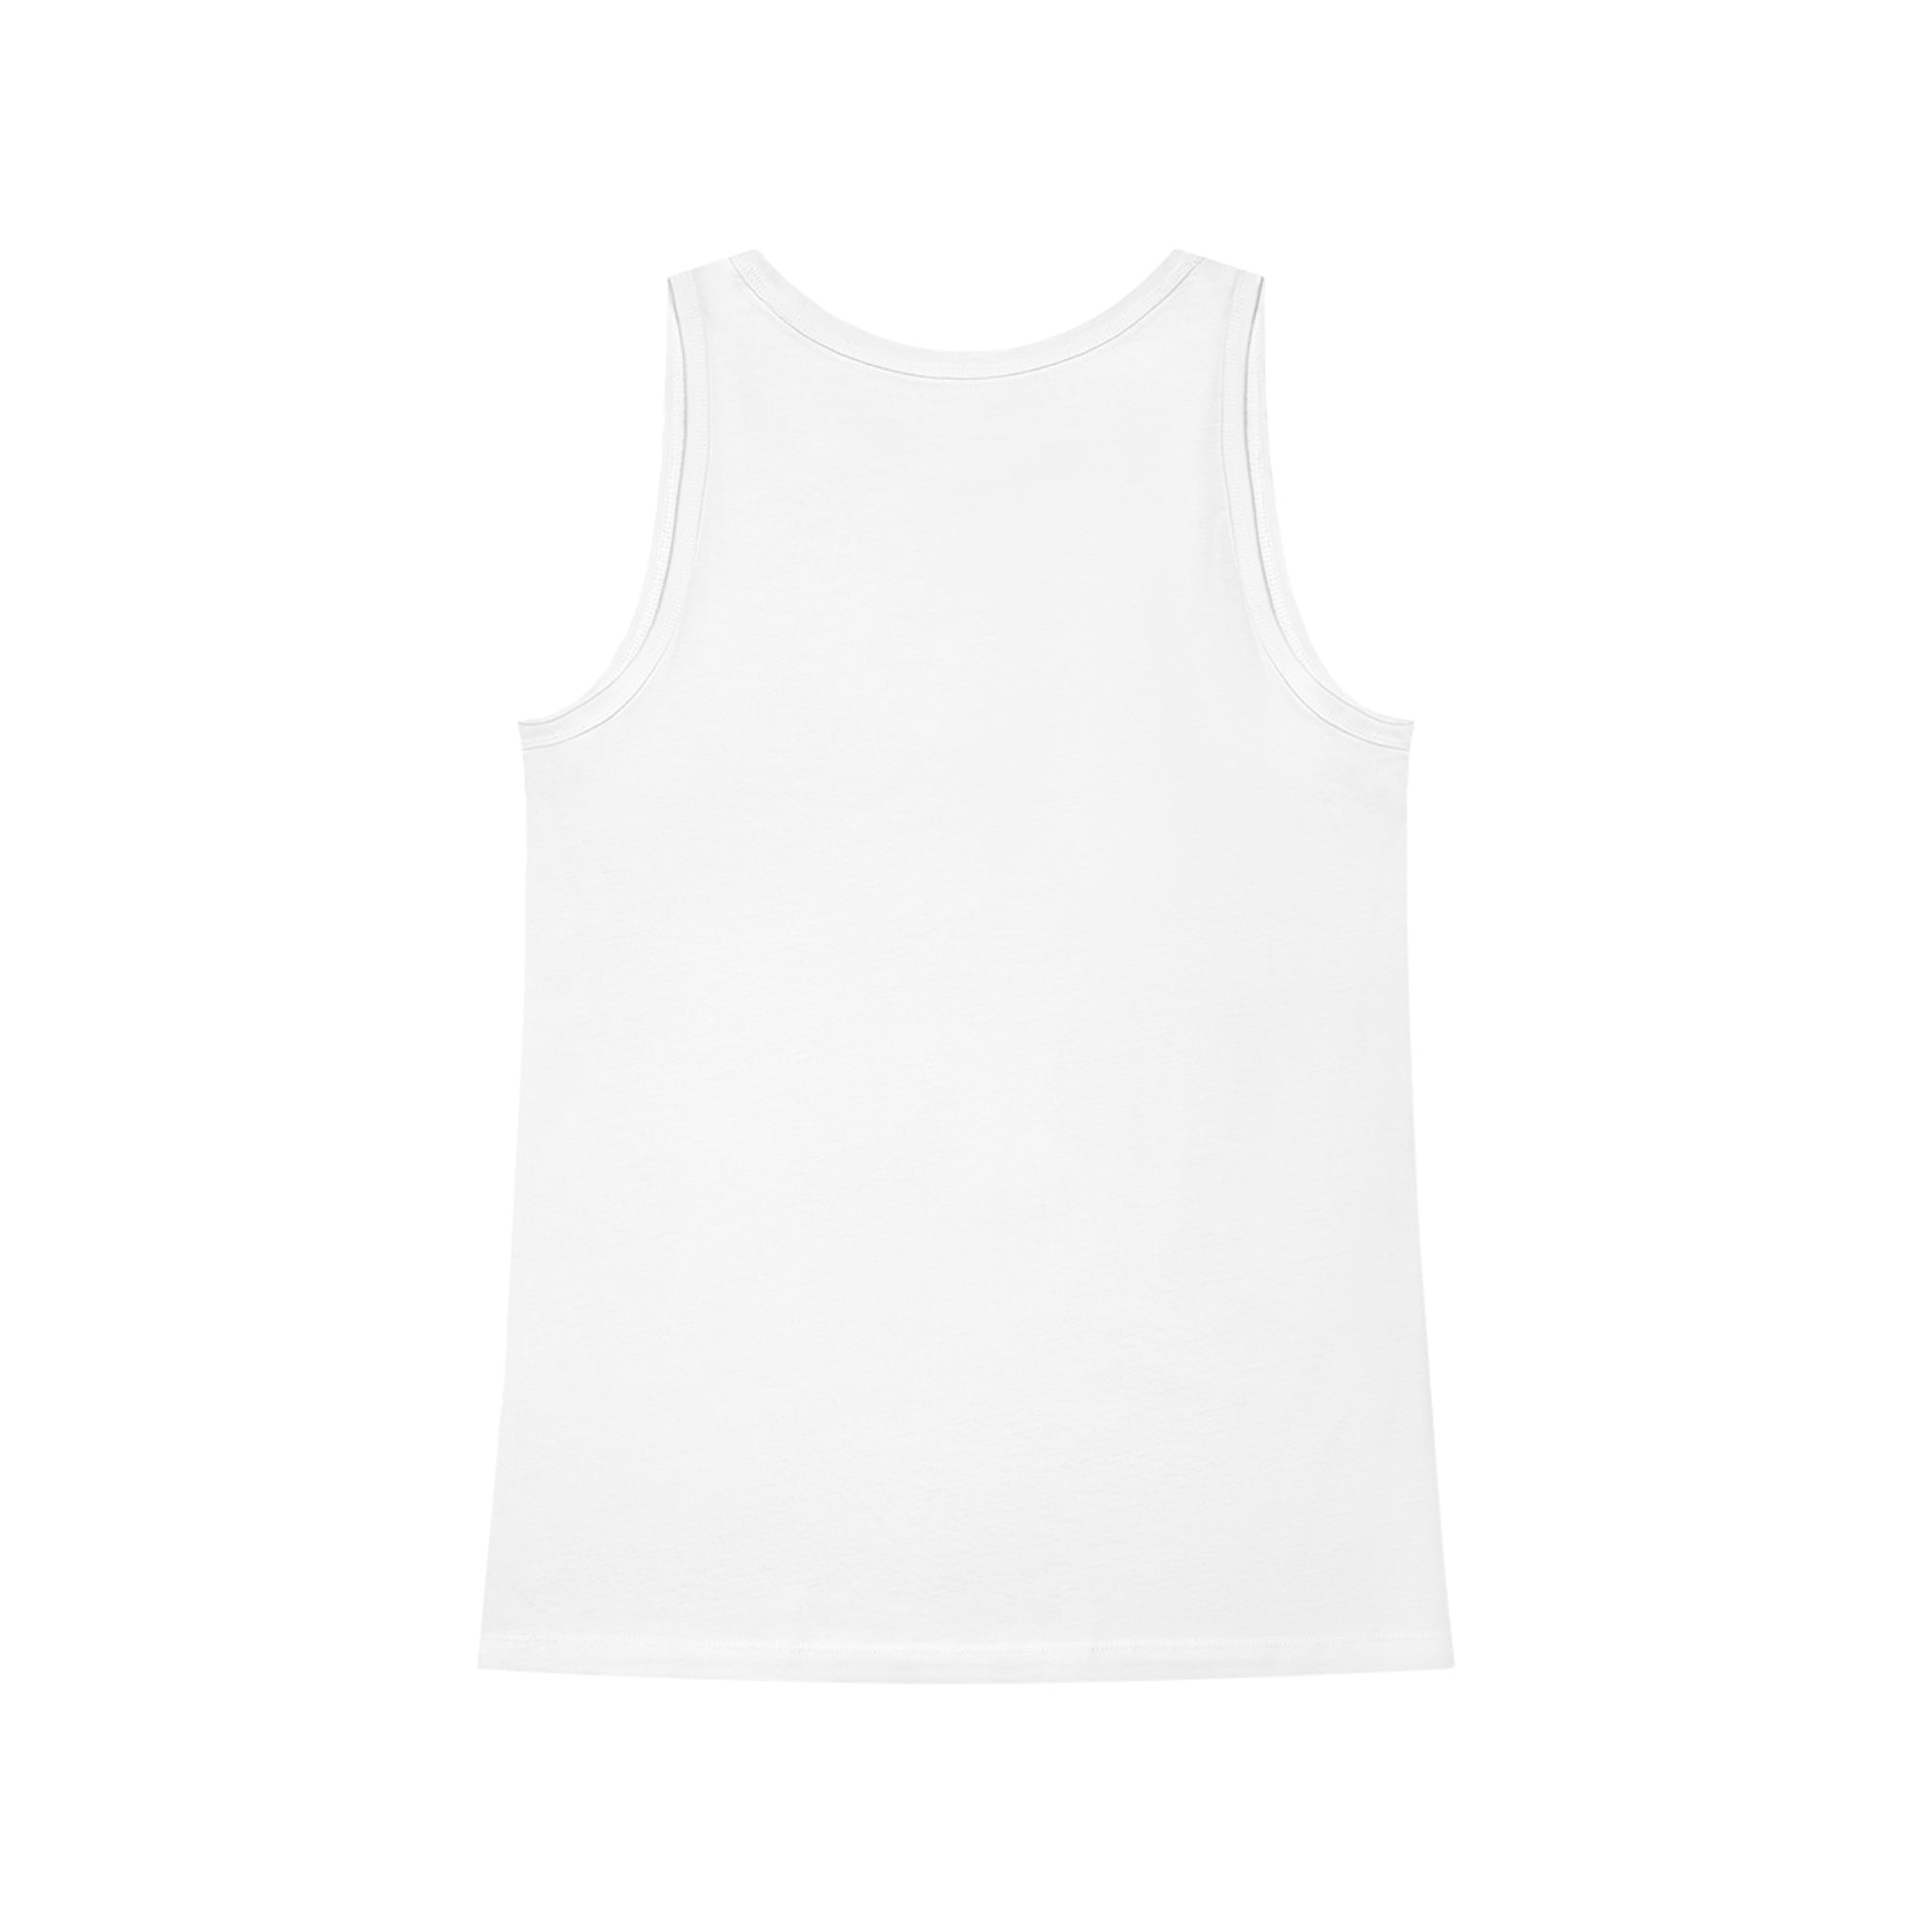 A Bouquet Tank Top on a white background, perfect for any occasion.